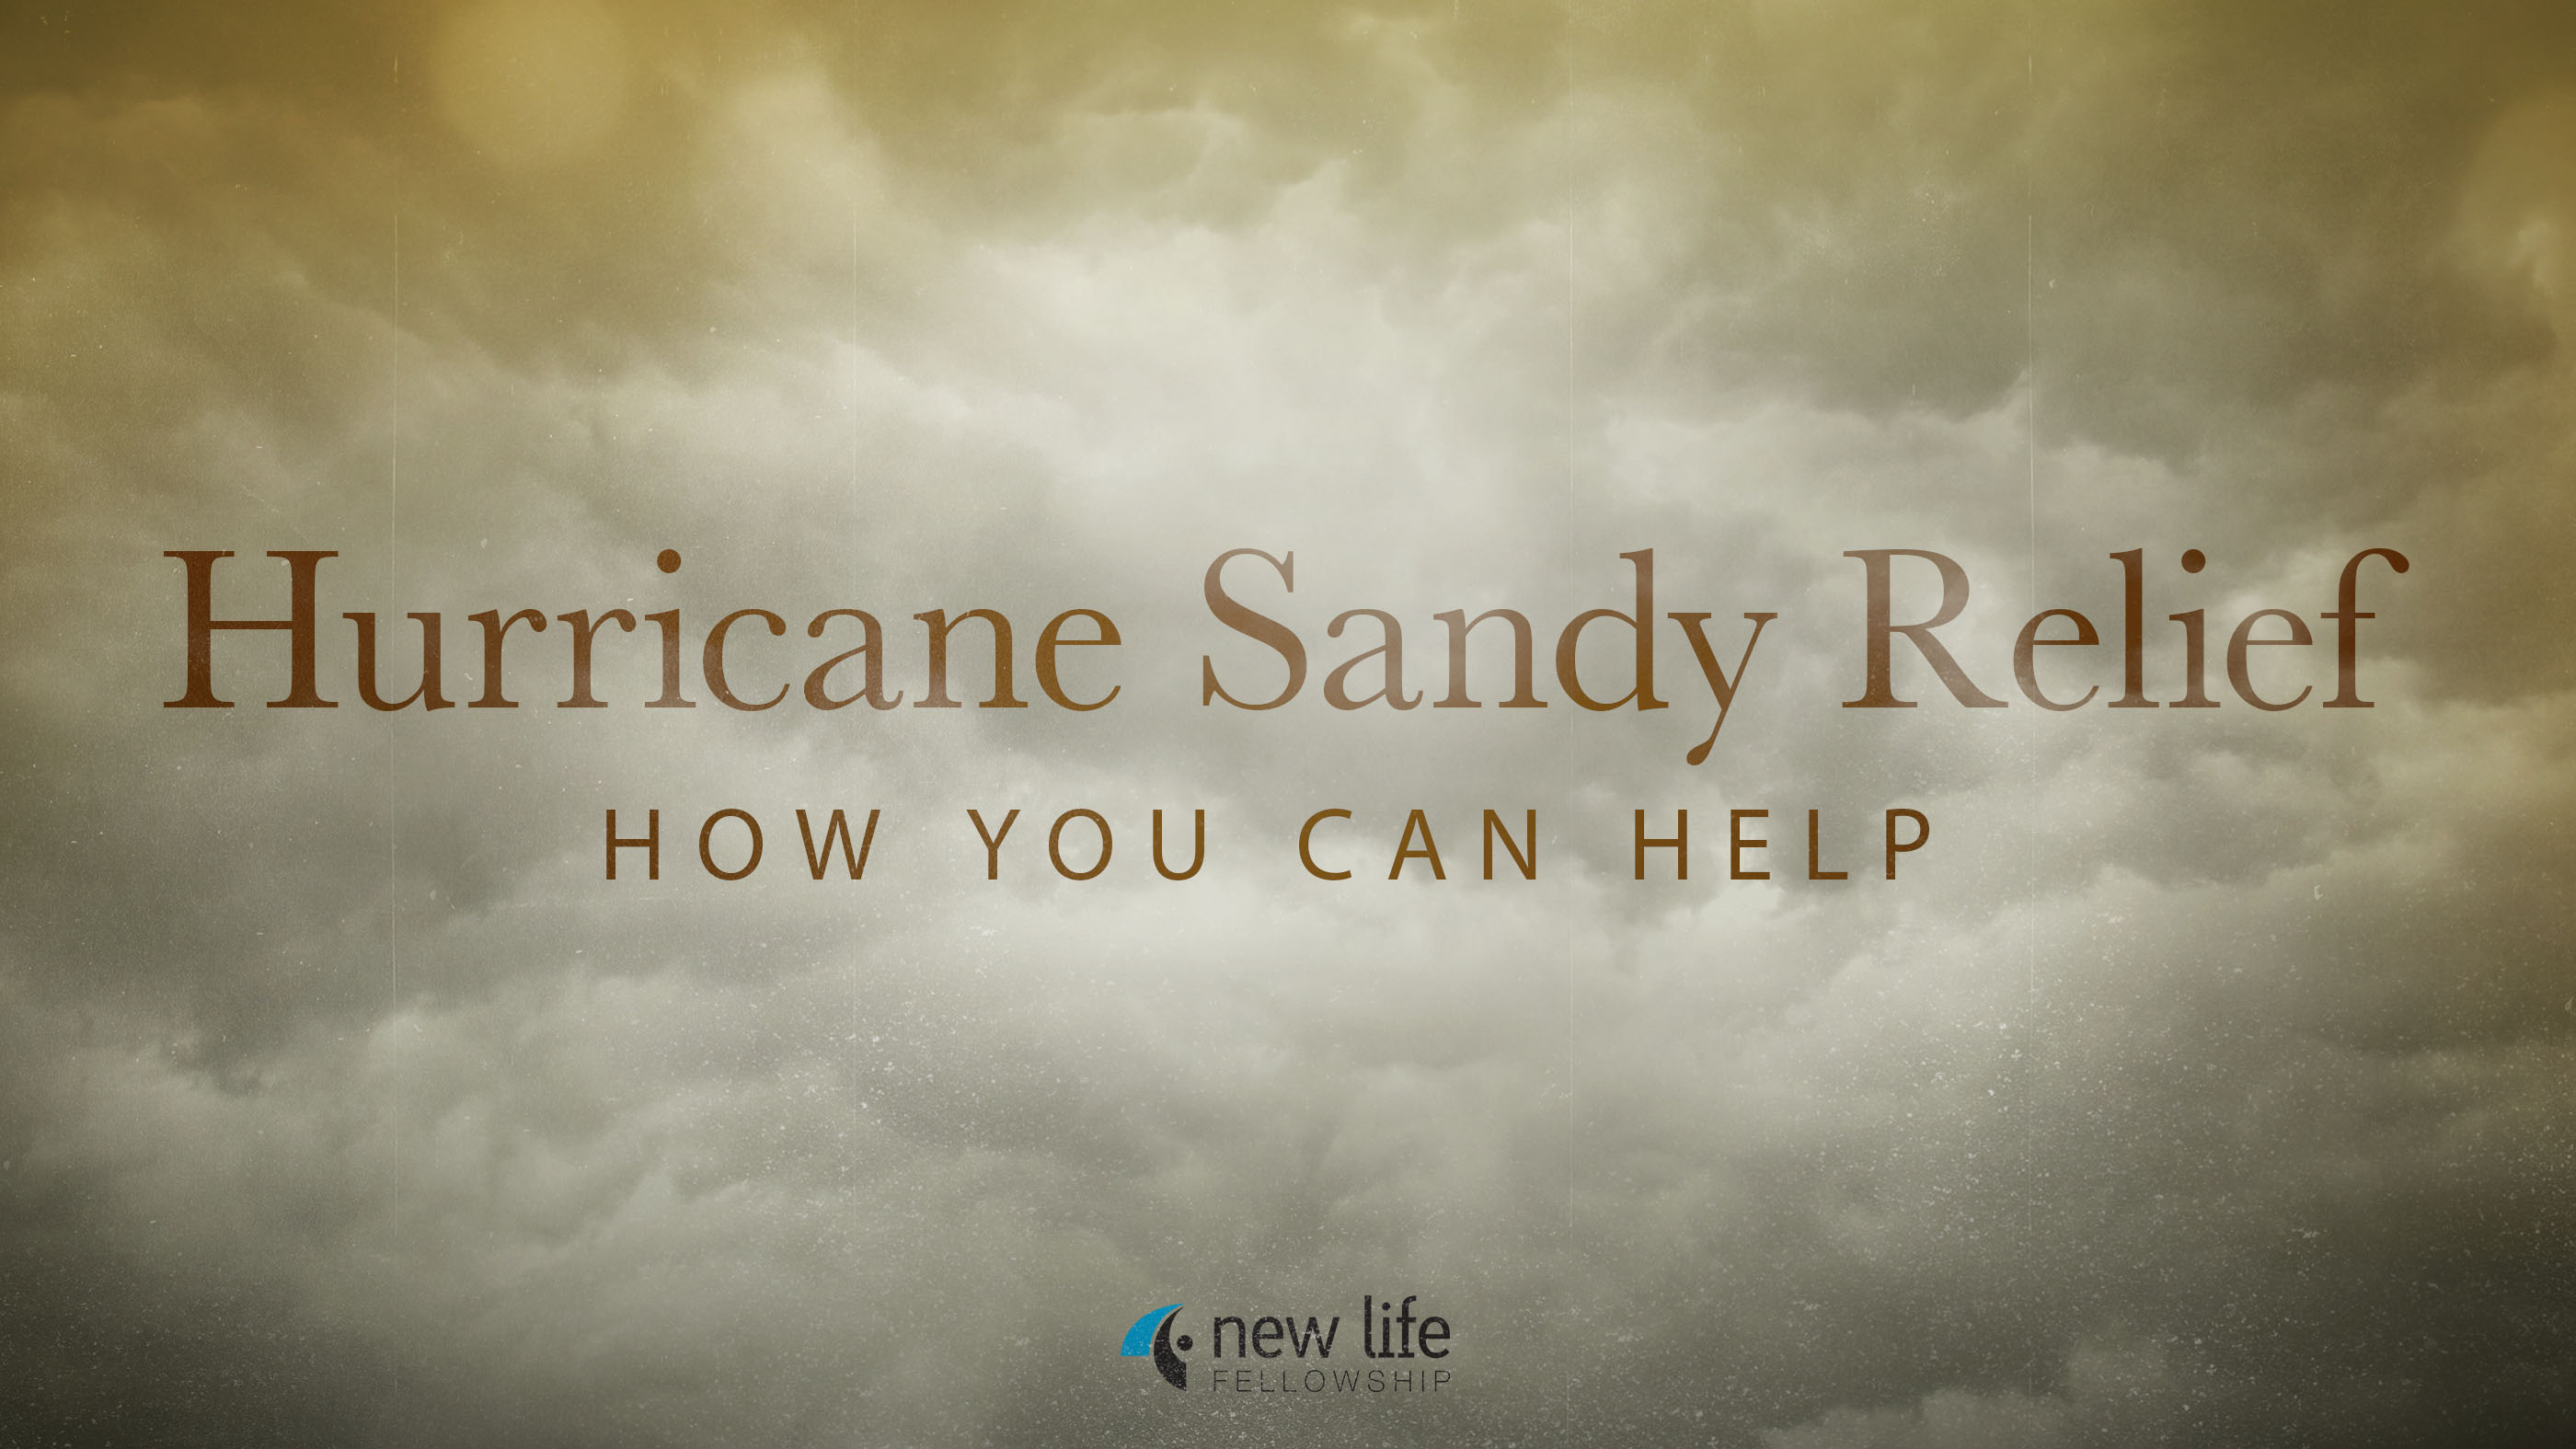 Hurricane Sandy Relief How you can help